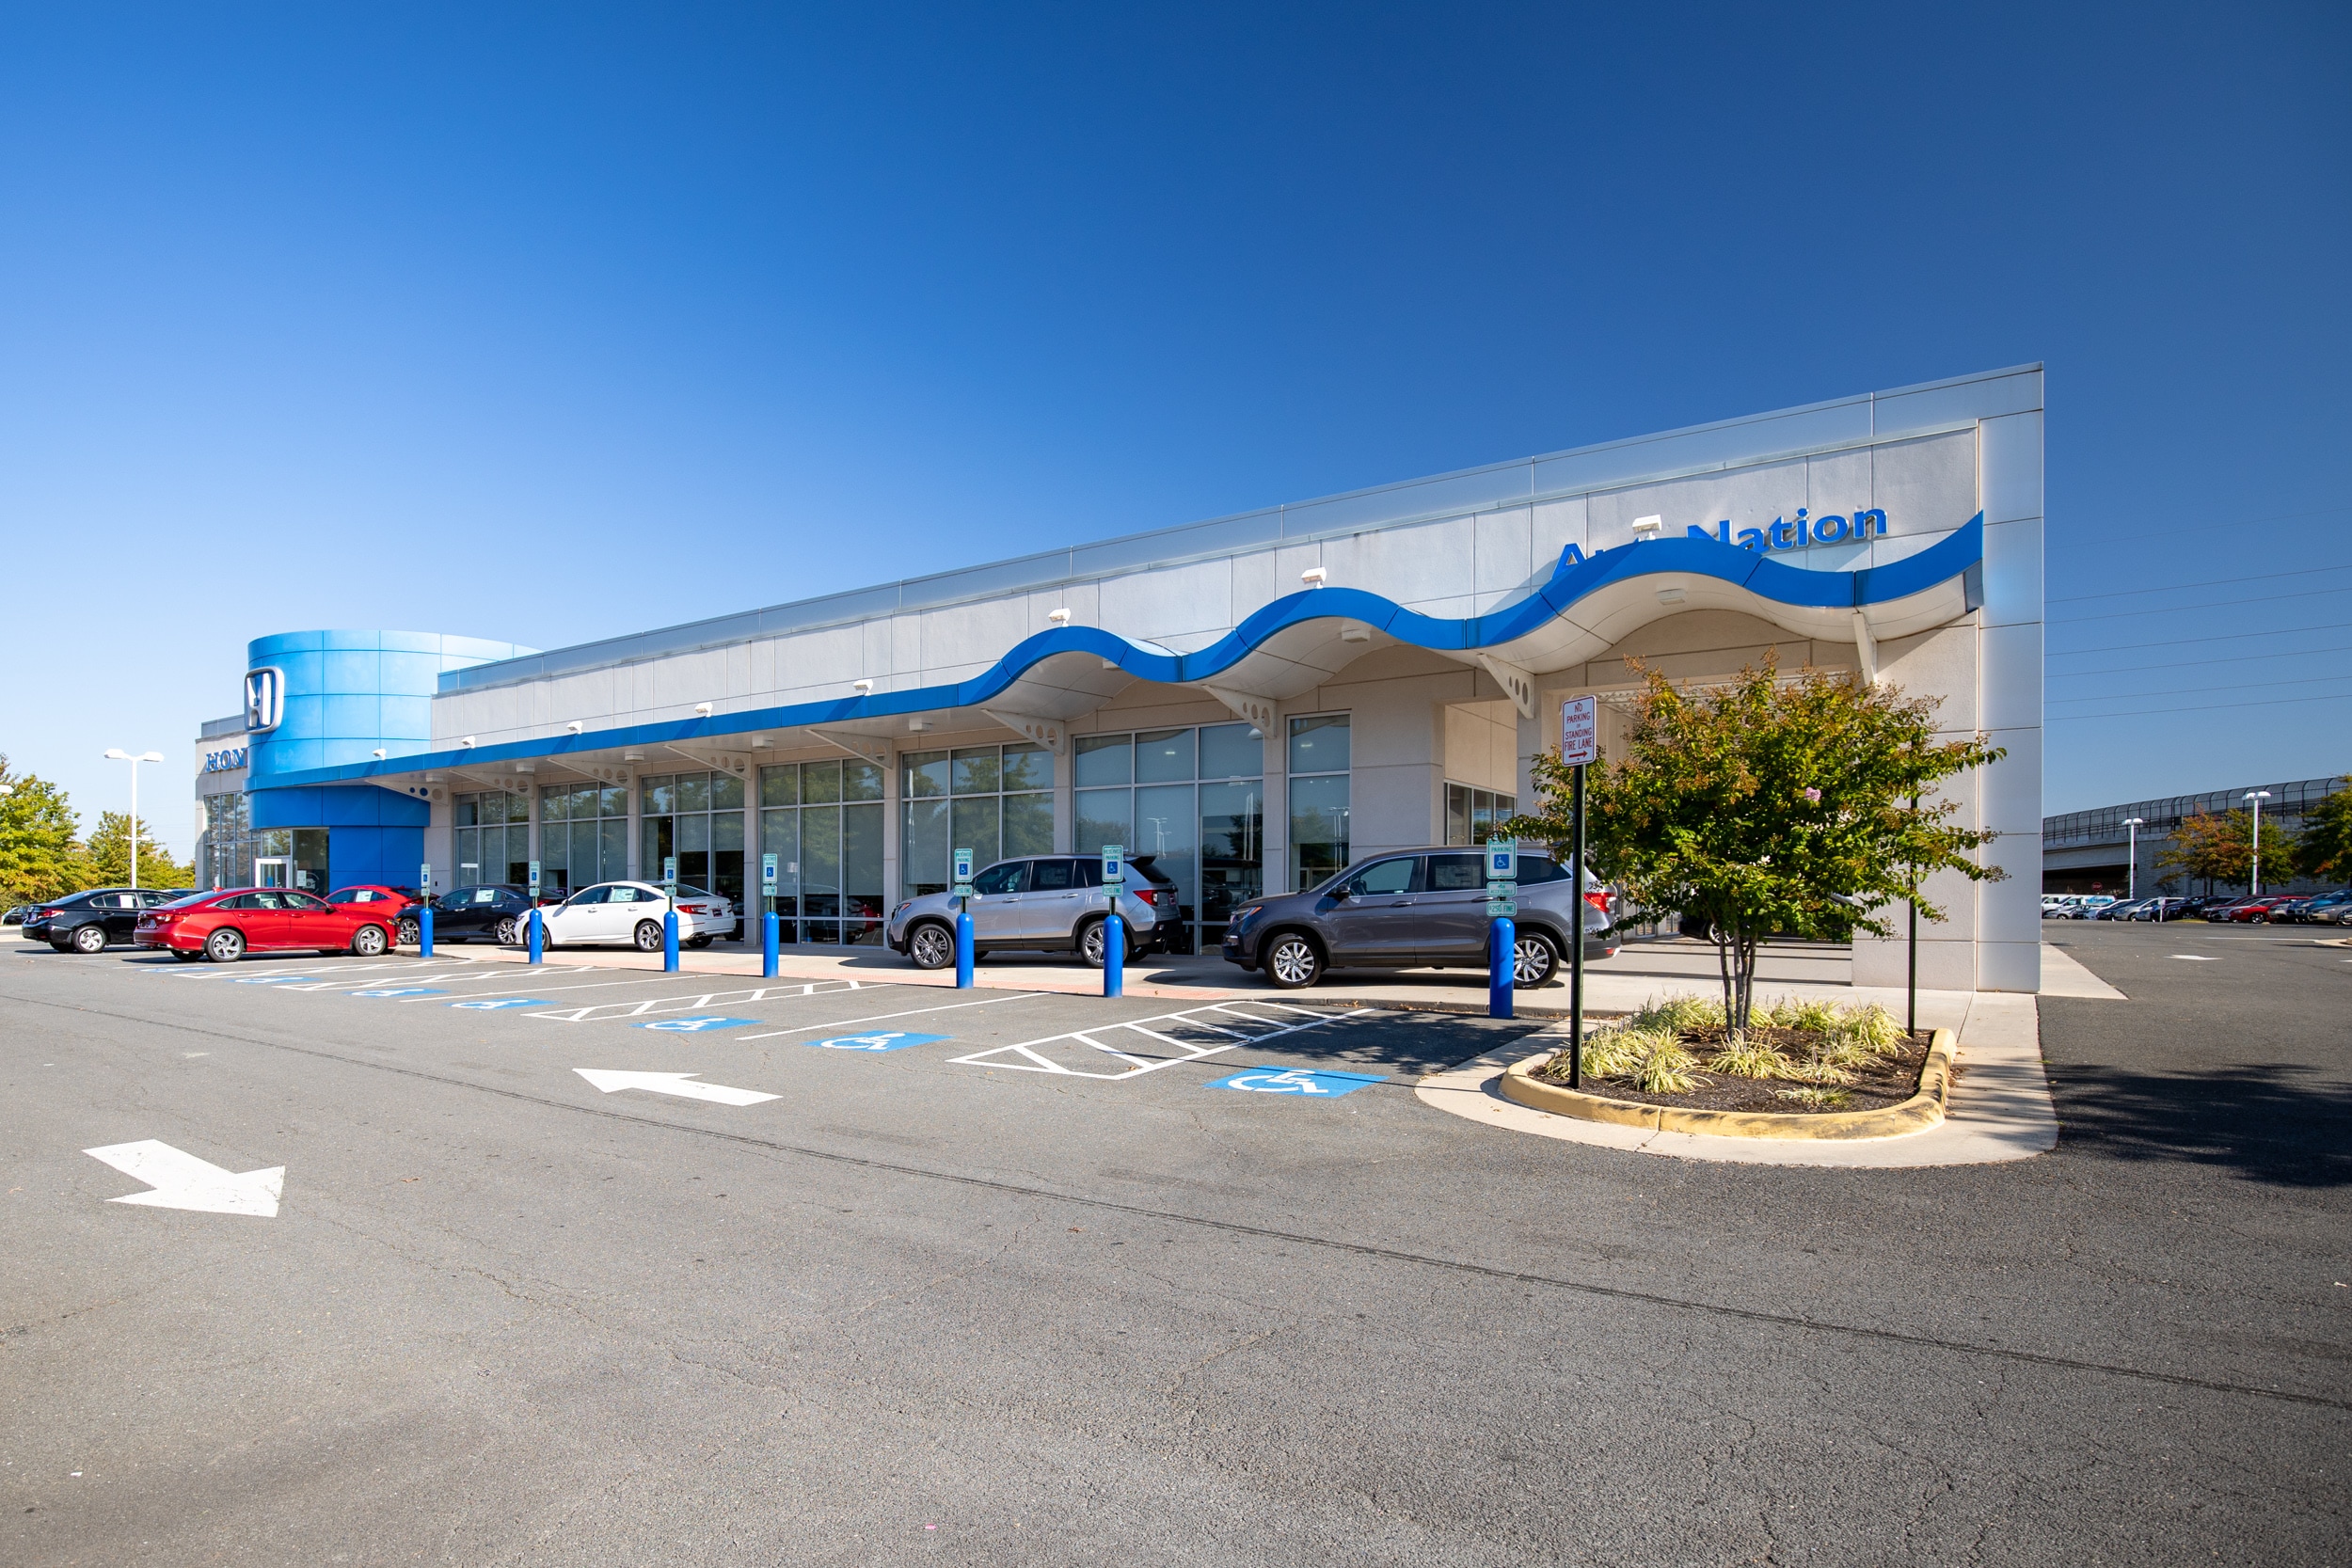 Directions & Hours for AutoNation Honda Dulles in Sterling, VA